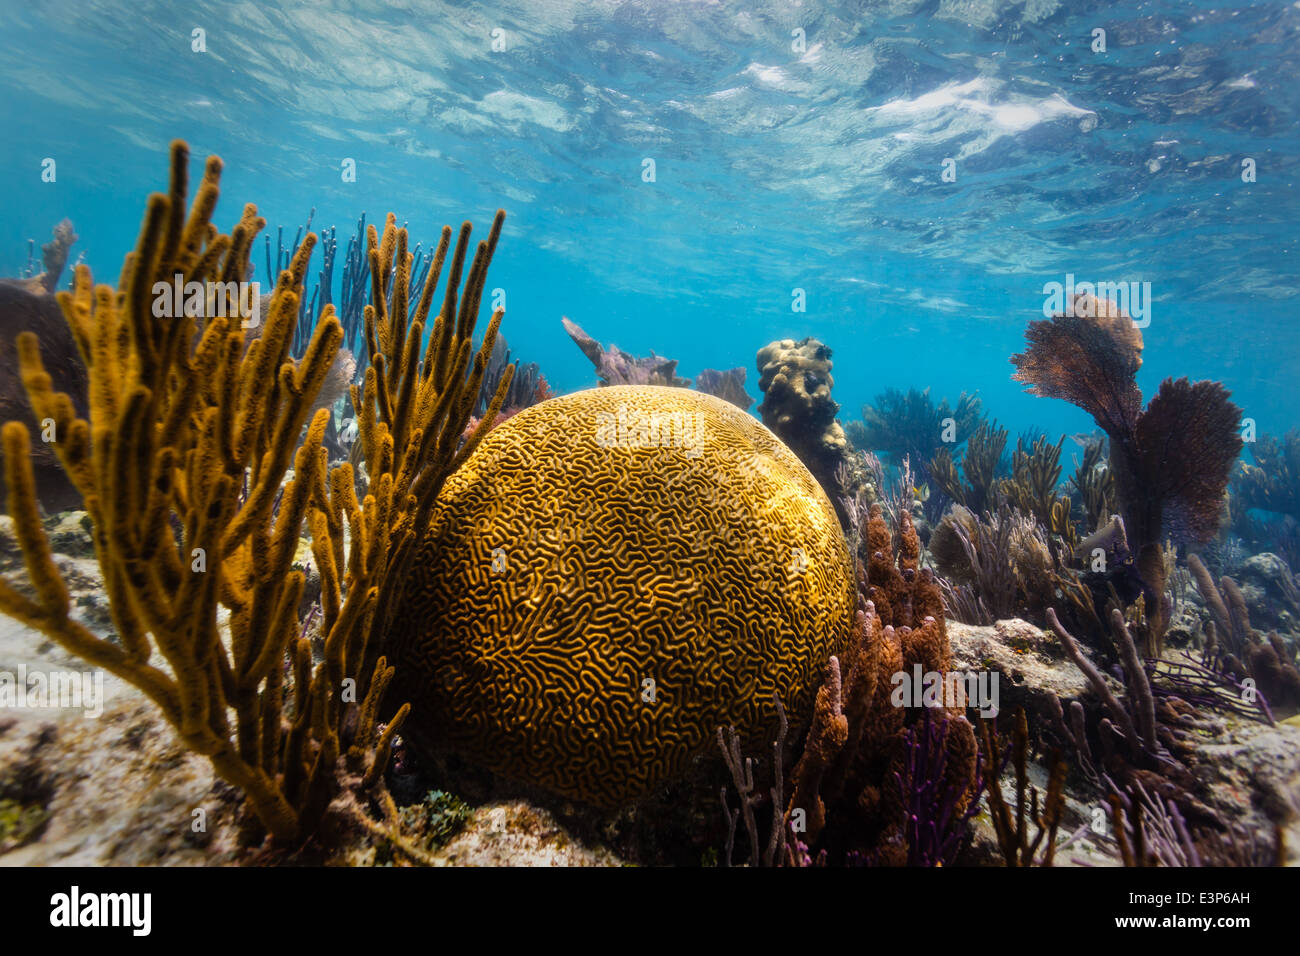 Close up of large round brain coral and branch coral on tropical coral reef in Caribbean Sea Stock Photo